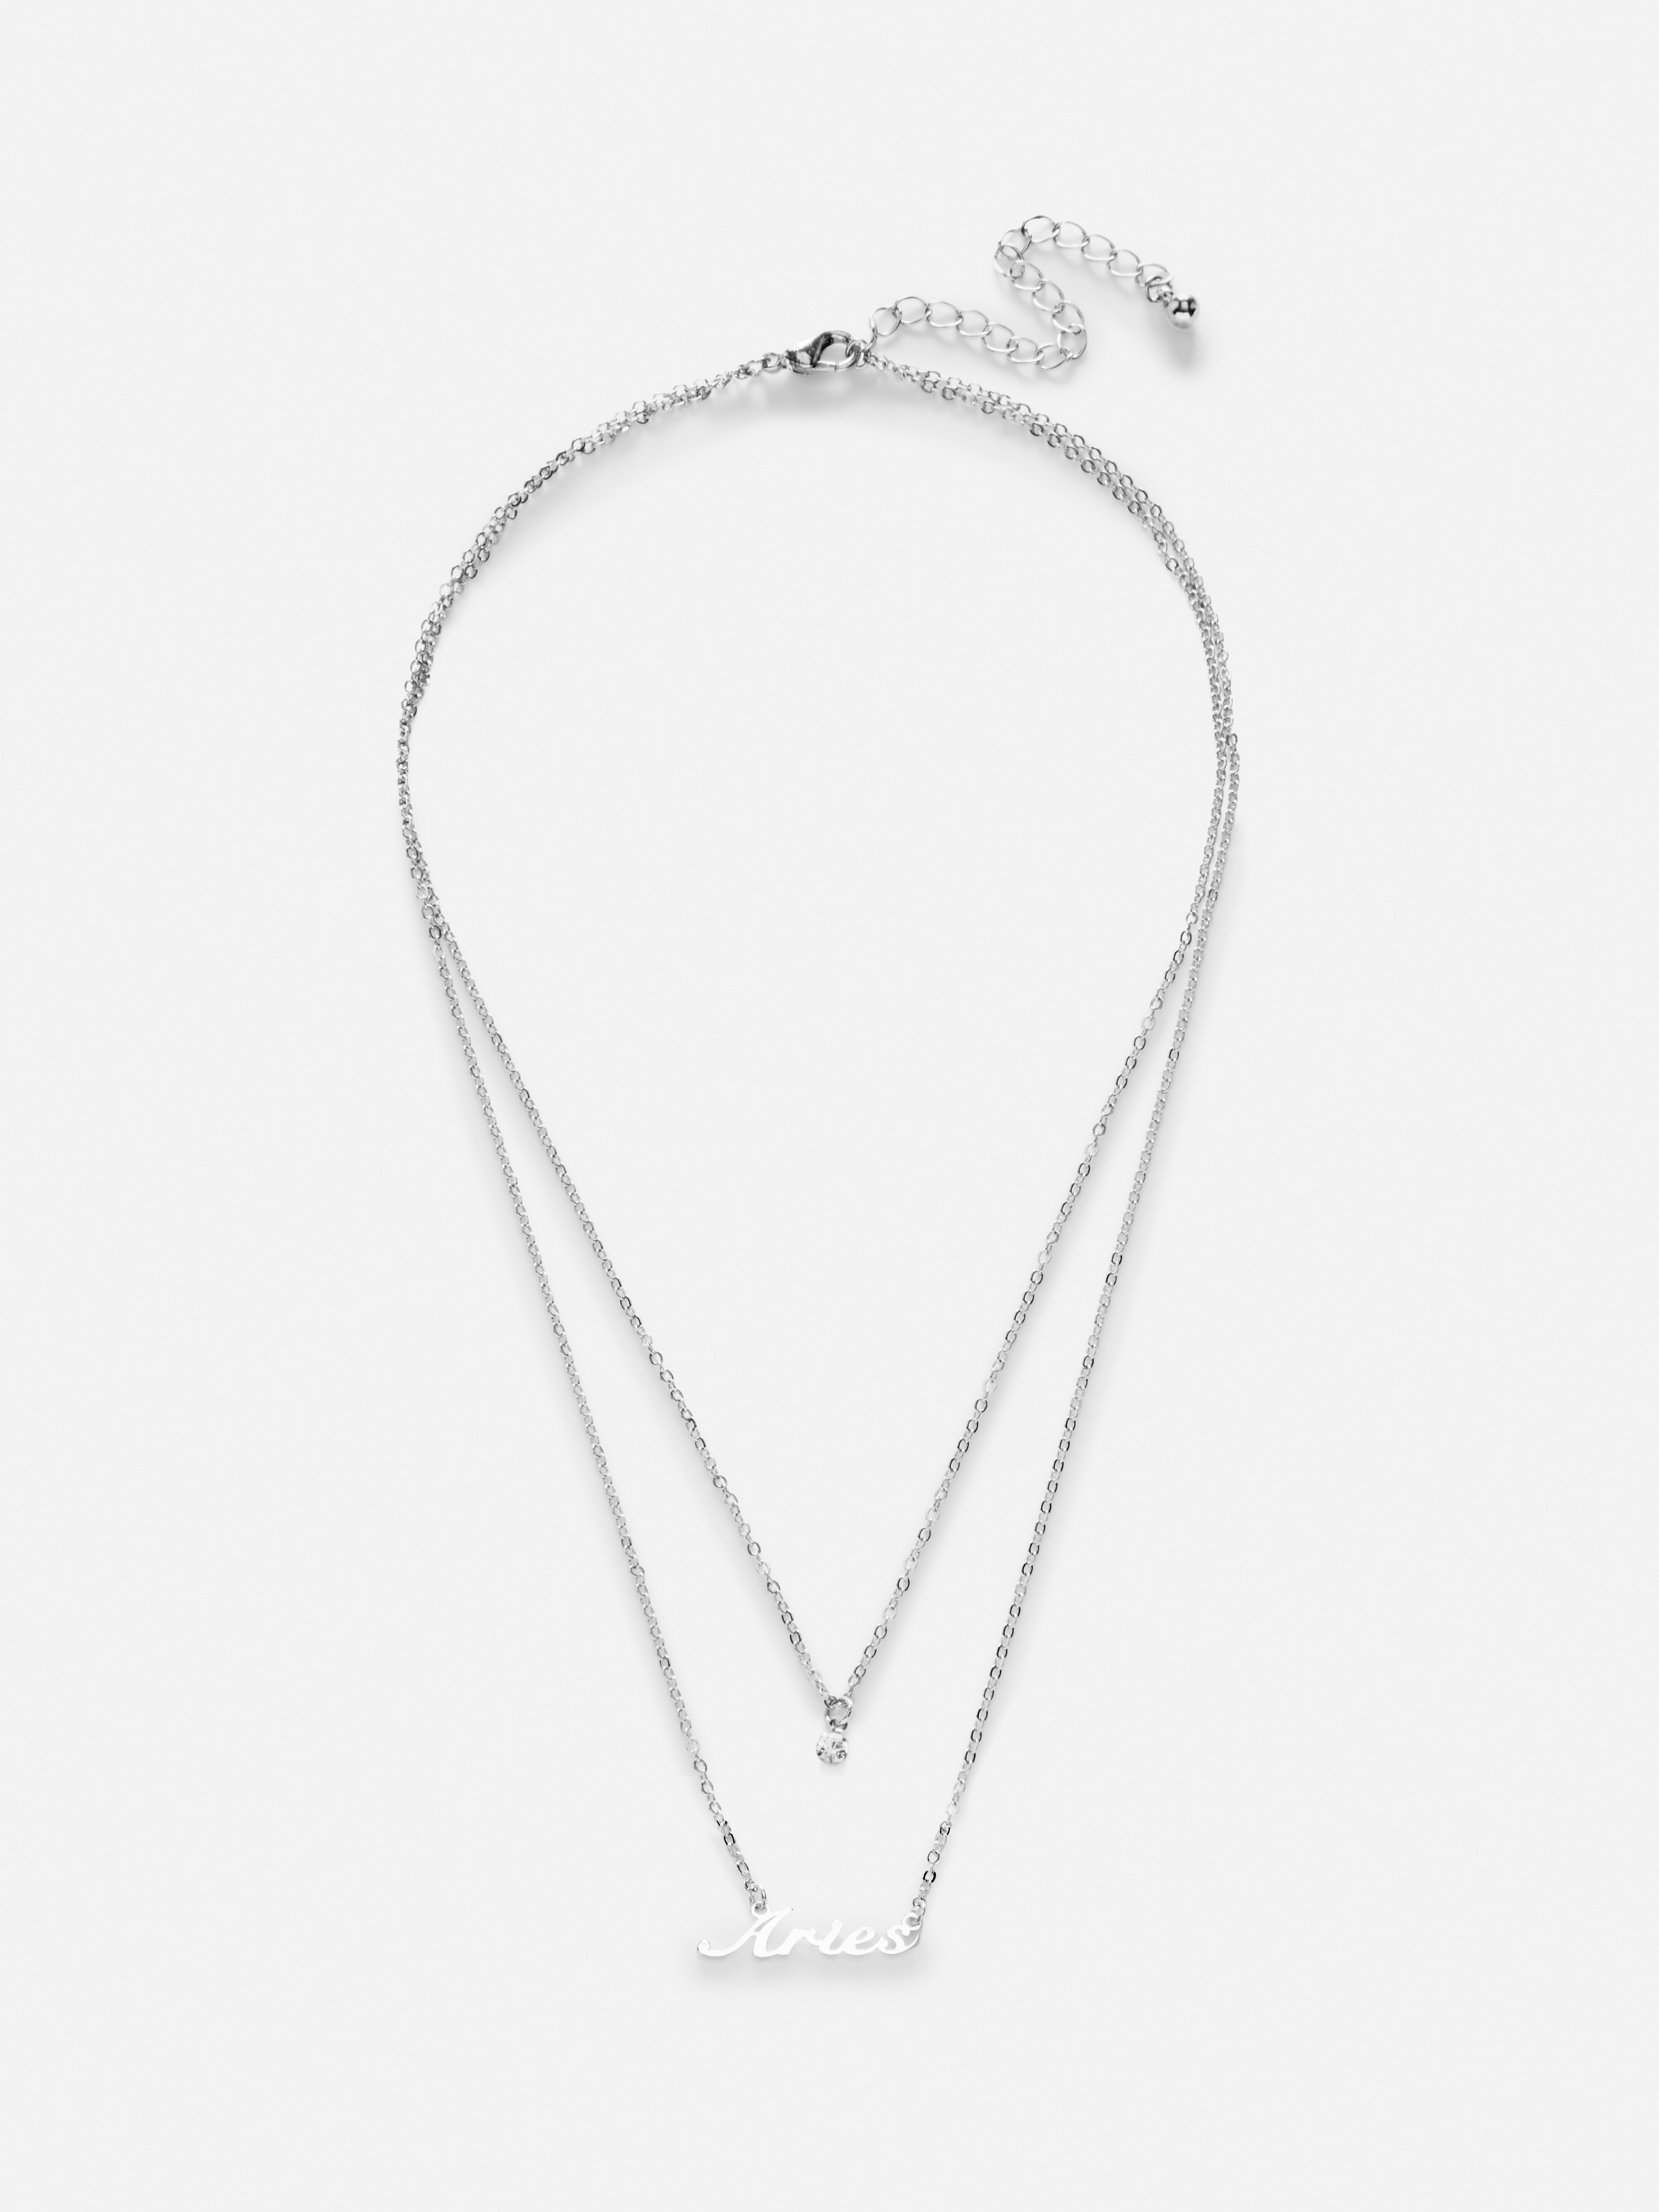 Layered Silver-Tone Star Sign Pendant Necklace